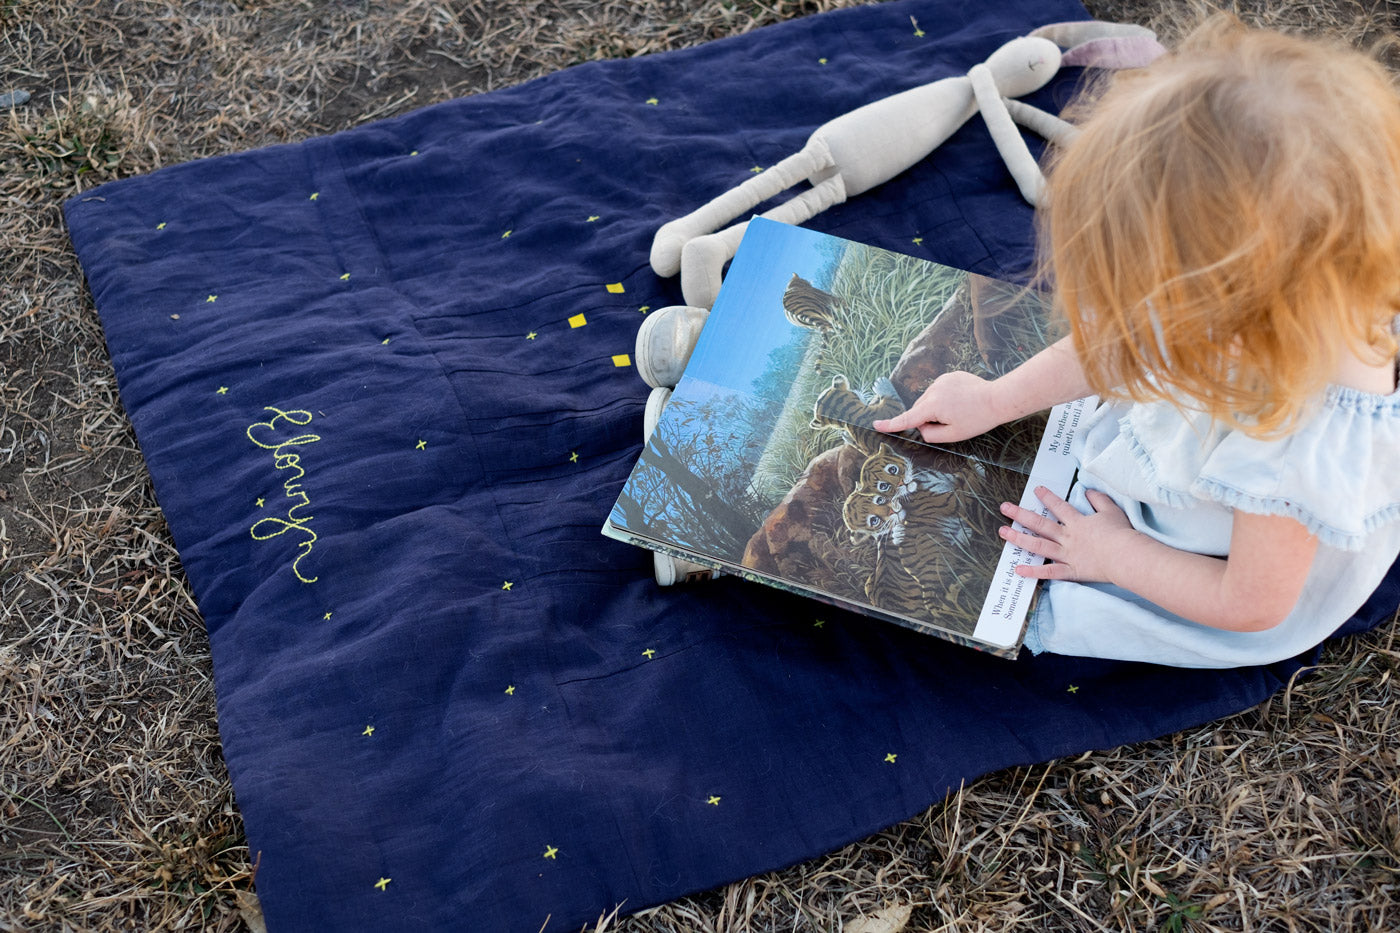 Elowyn reading a book on top of her Constellation Quilt